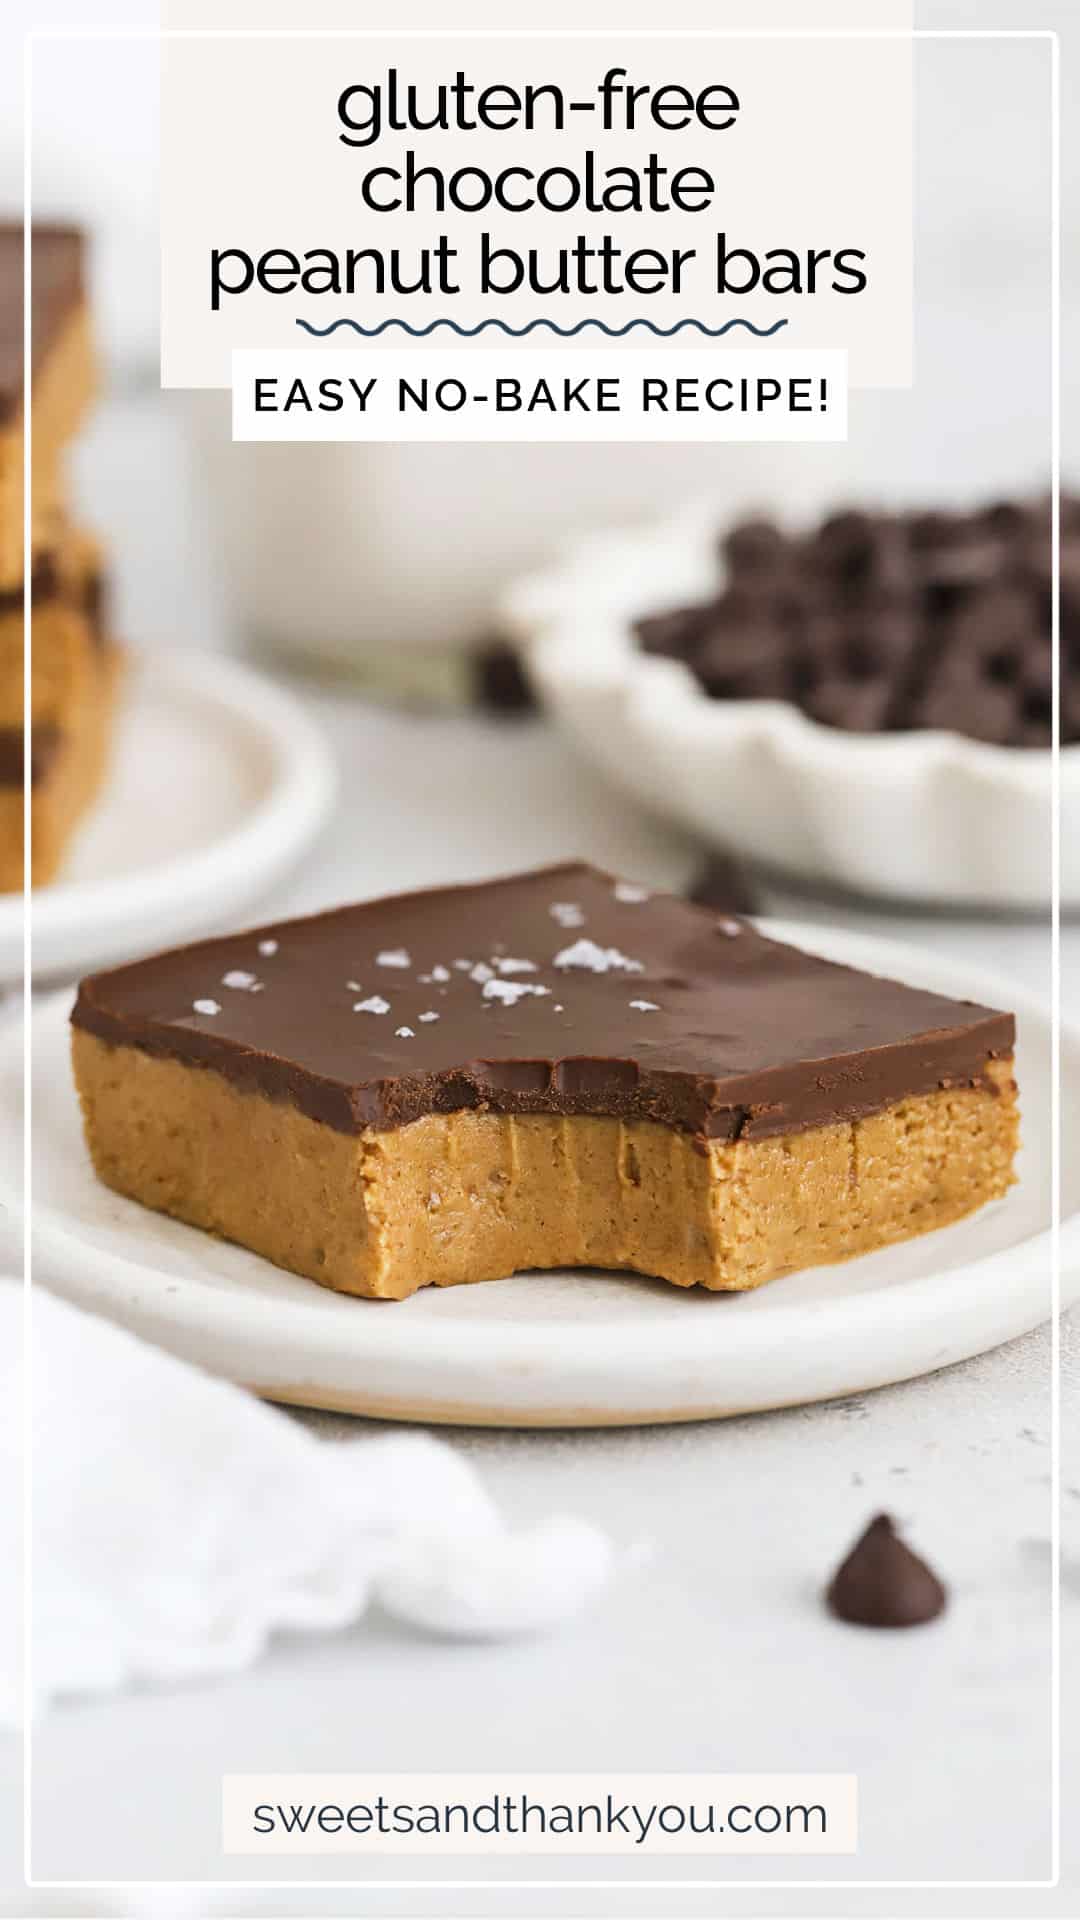 Let's make gluten-free lunch lady peanut butter bars! These no-bake gluten-free peanut butter bars are topped with a layer of chocolate for a delicious finish that's perfect for peanut butter lovers! / gluten free chocolate peanut butter bars / gluten free no bake peanut butter bars / gluten free no bake chocolate peanut butter bars recipe / no bake gluten free dessert / no bake gluten free treat / easy gluten free dessert recipe /